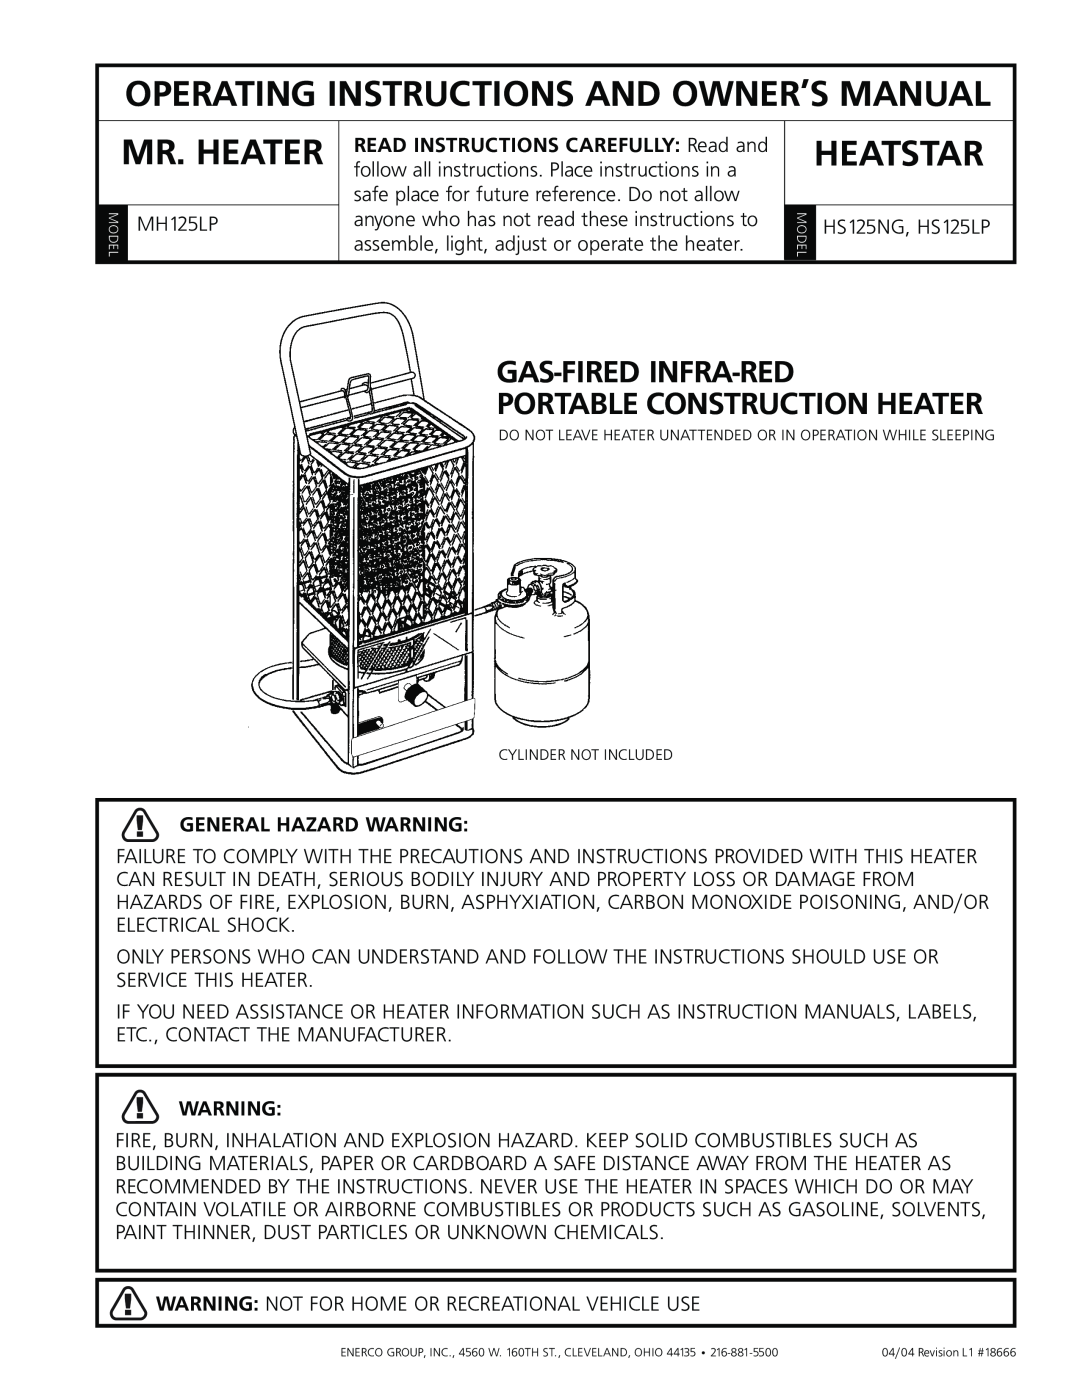 Gas-Fired Products HS125NG manual Operating Instructions And Owner’S Manual, Mr. Heater, Heatstar, General Hazard Warning 